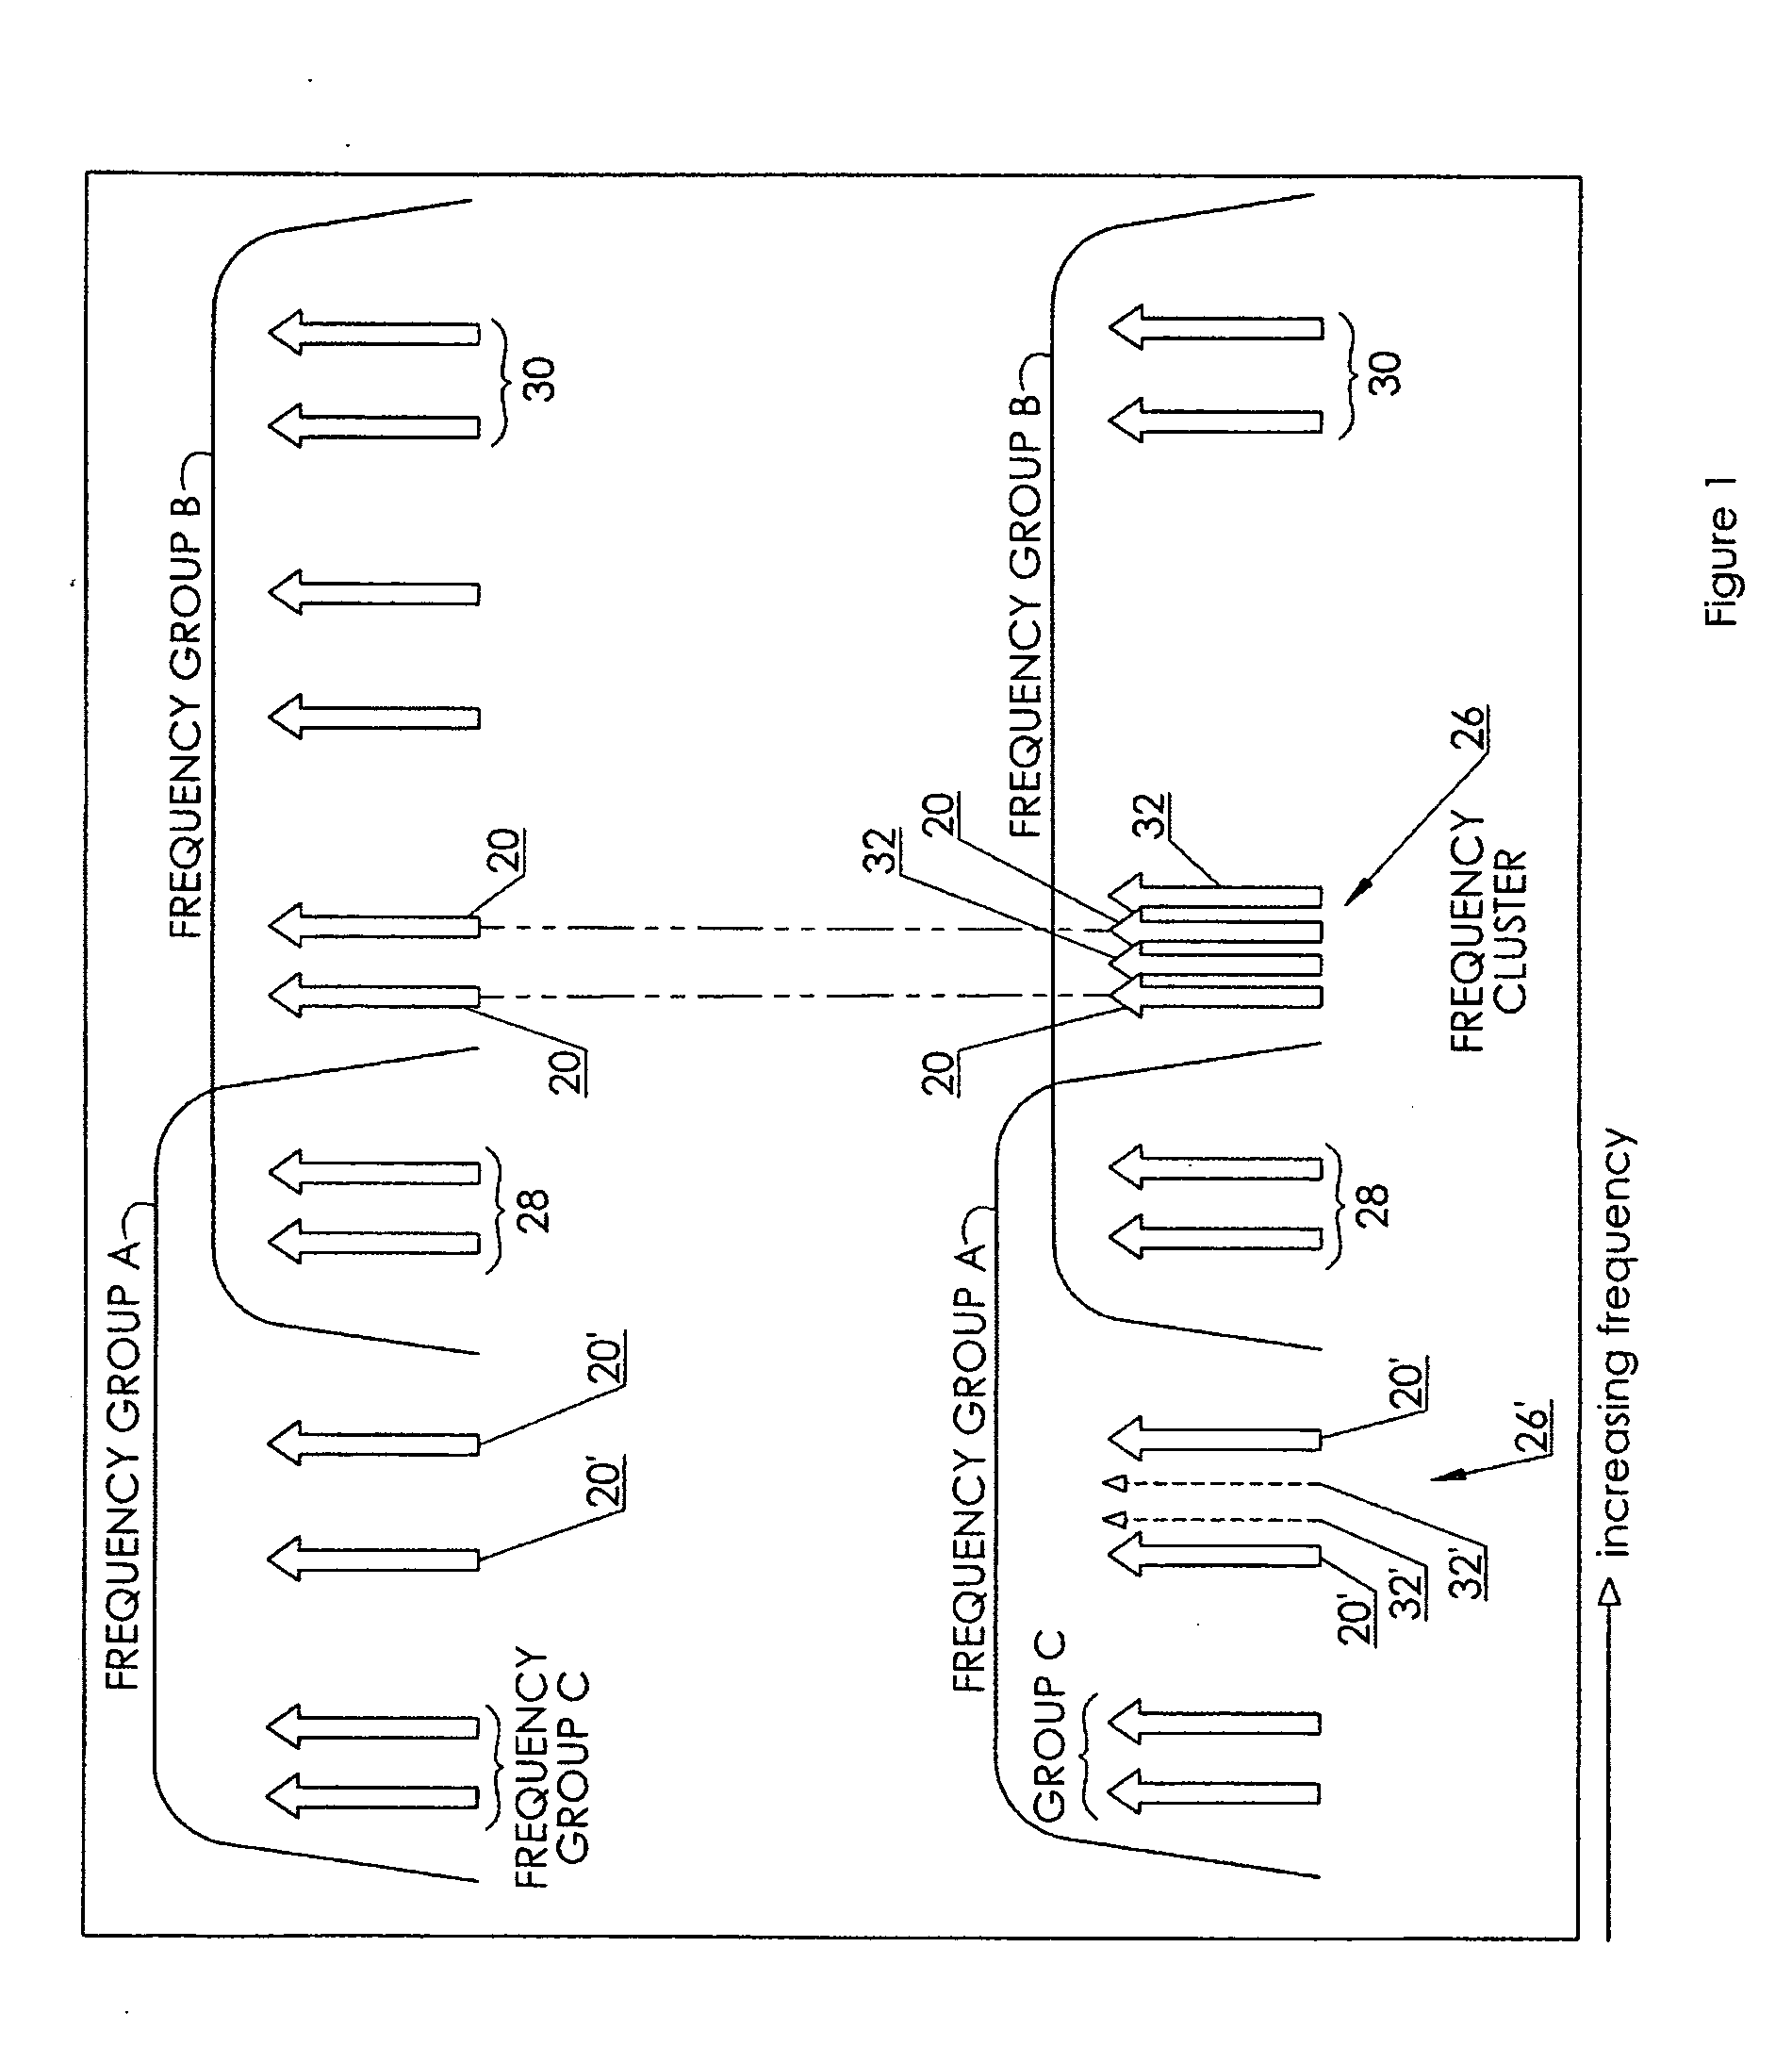 Non-orthogonal frequency-division multiplexed communication through a non-linear transmission medium